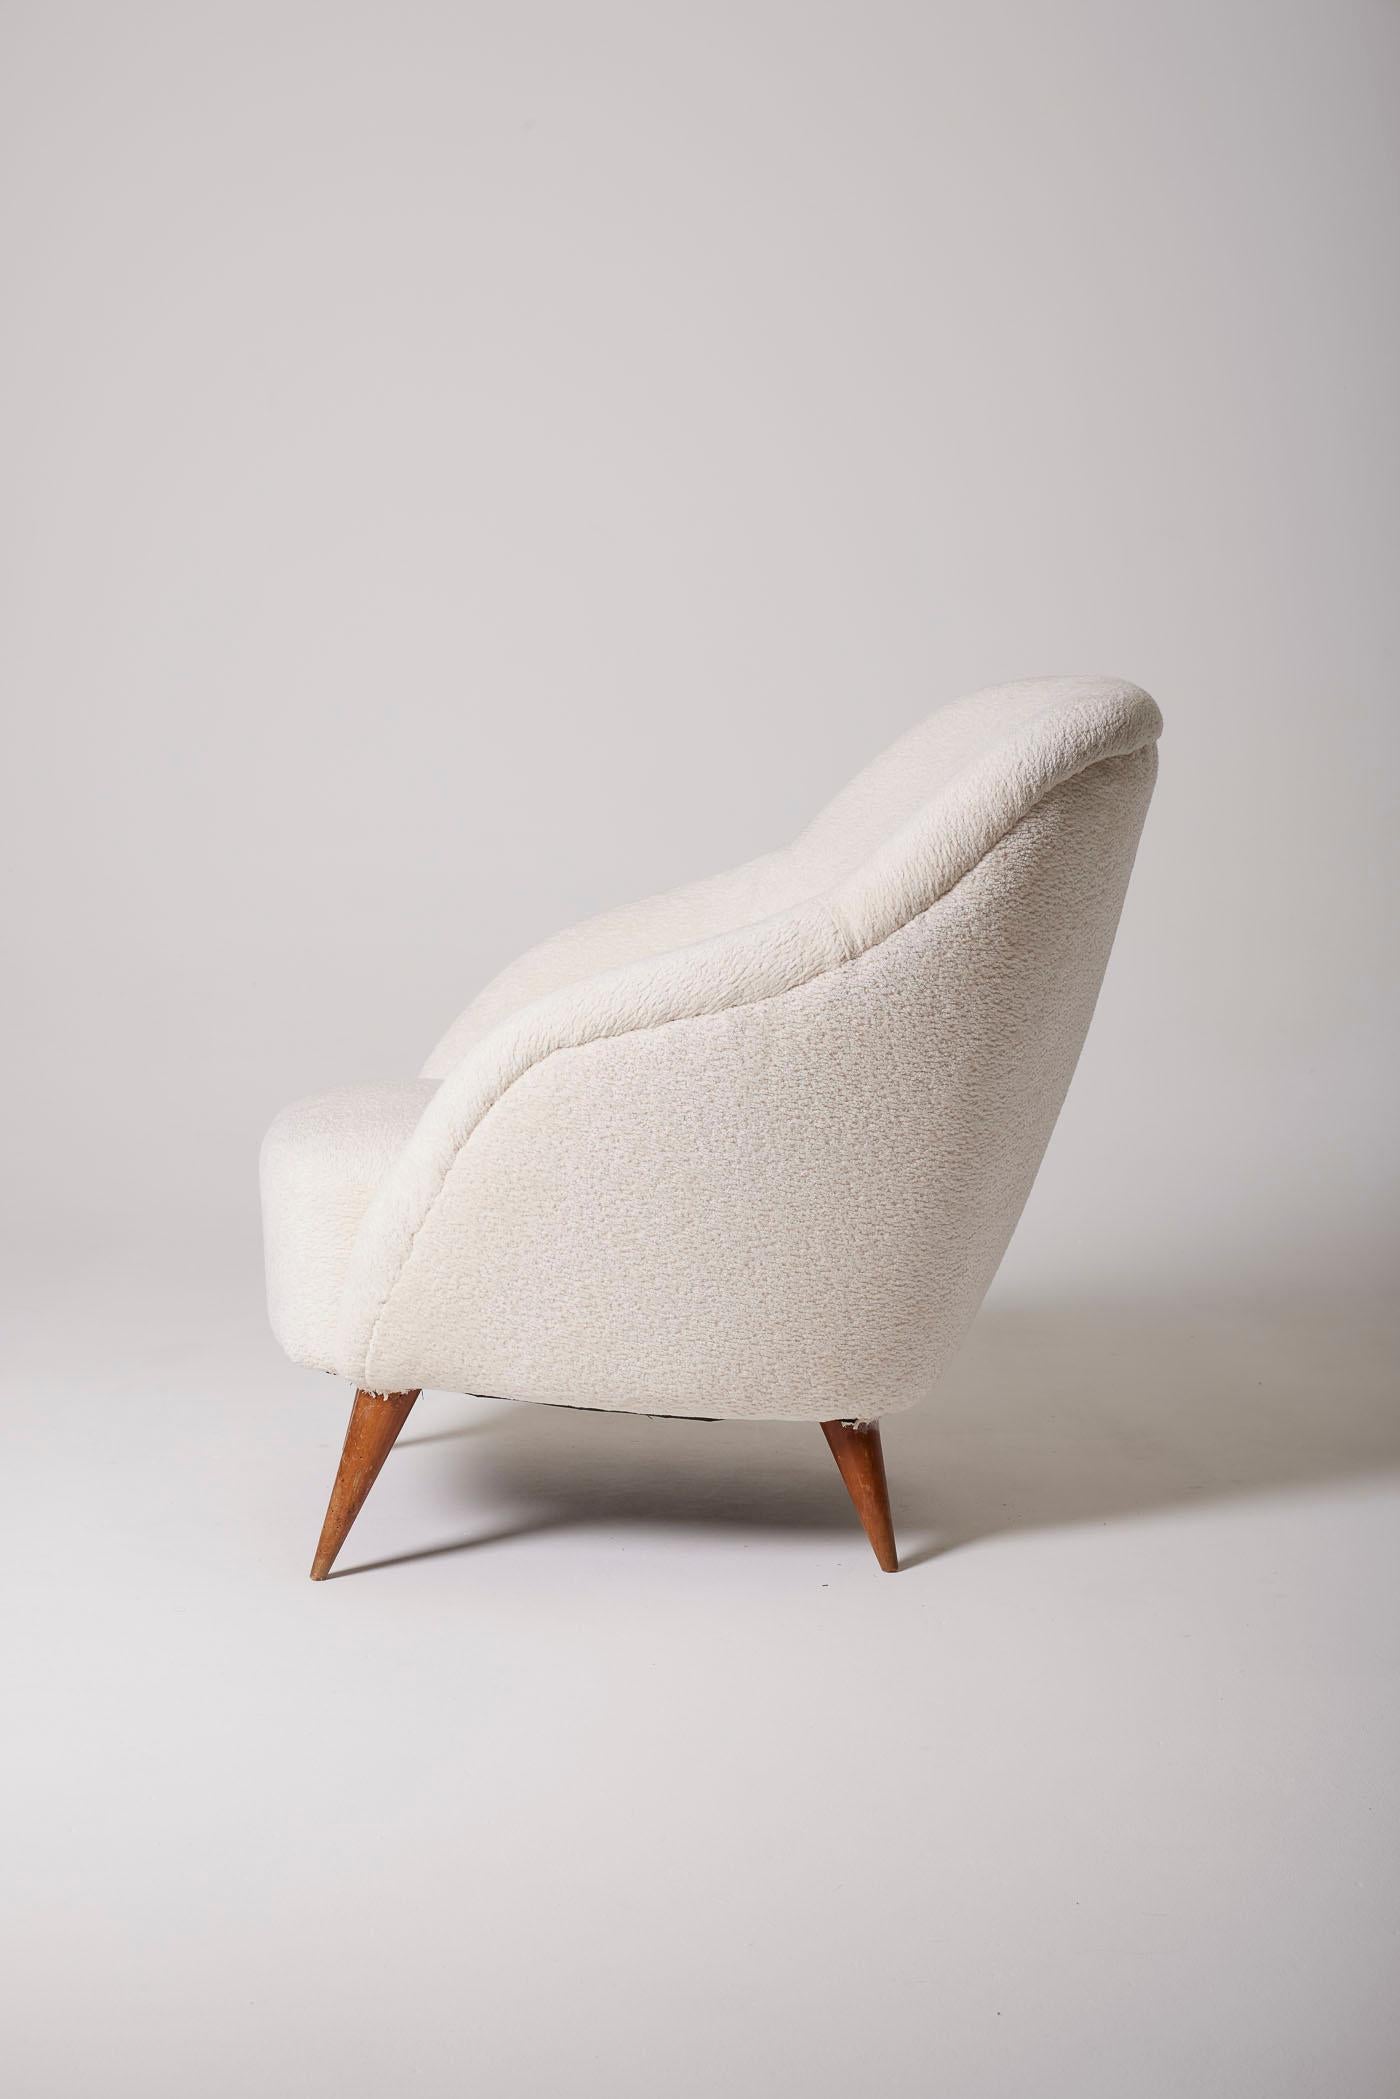 Italian armchair from the 1950s inspired by the designer Gio Ponti. This armchair has been reupholstered with bouclé fabric. The base is made of wood. Perfect condition.
DV346